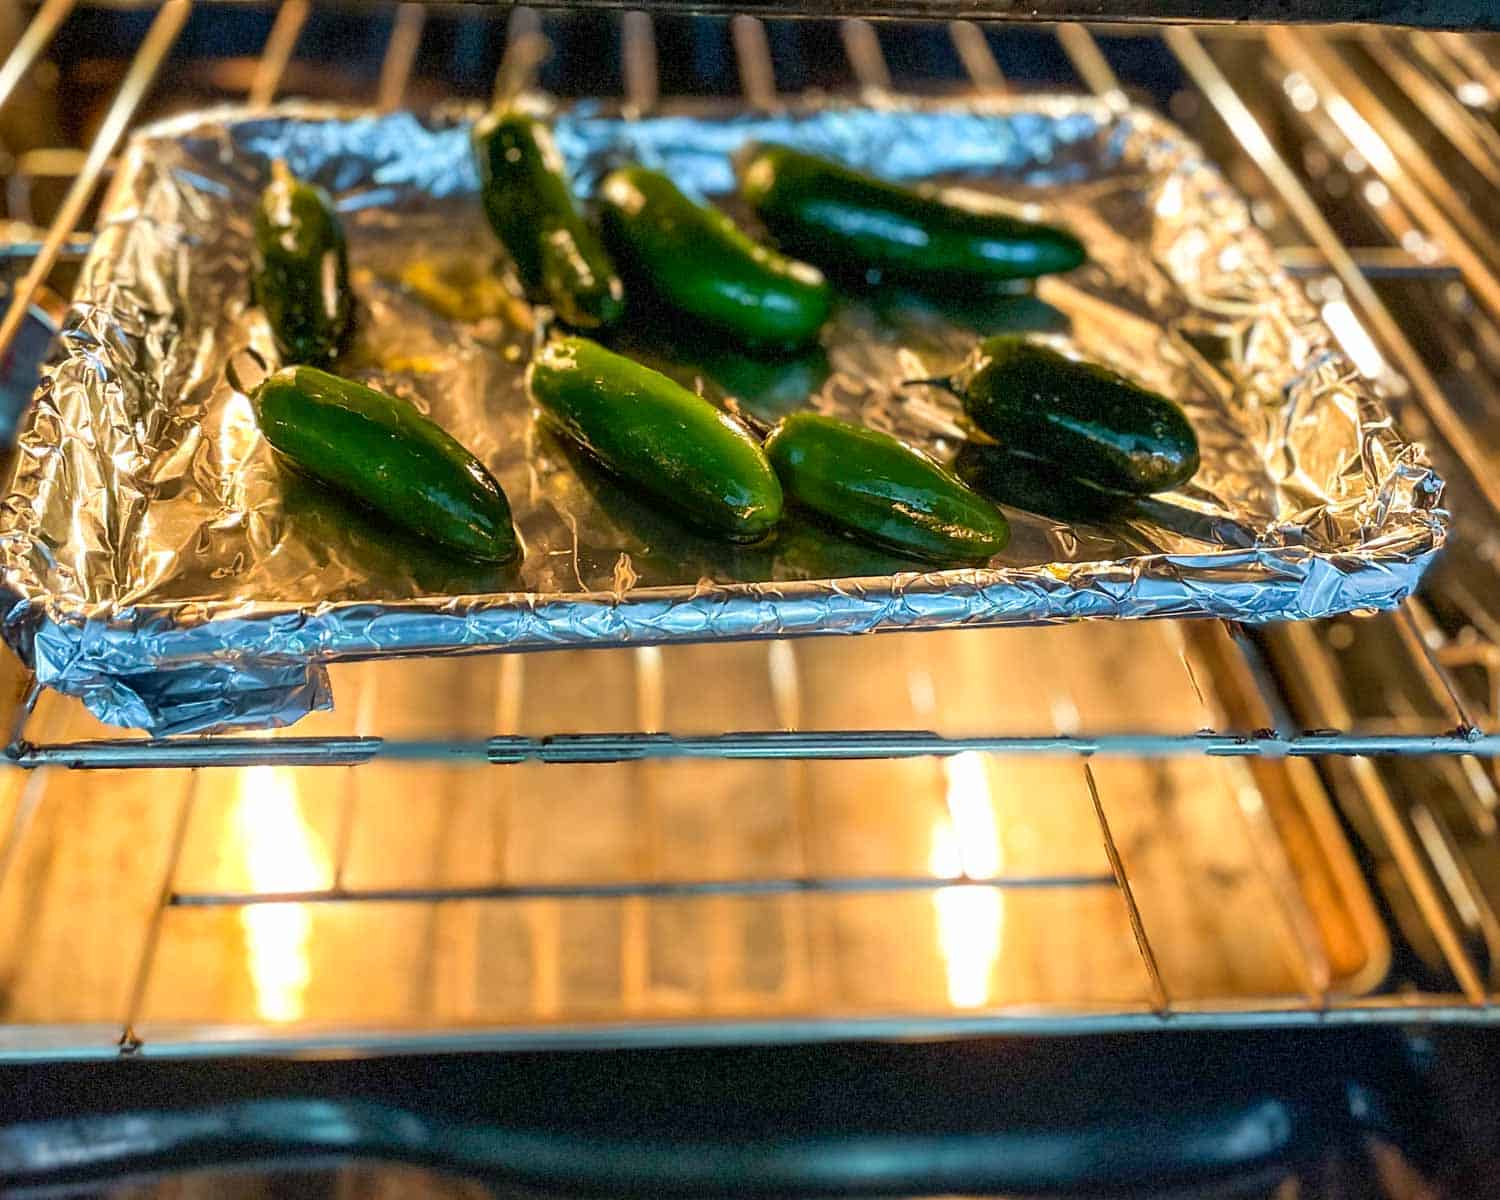 Jalapeños coated in olive oil on a lined sheet tray are moved to the oven.